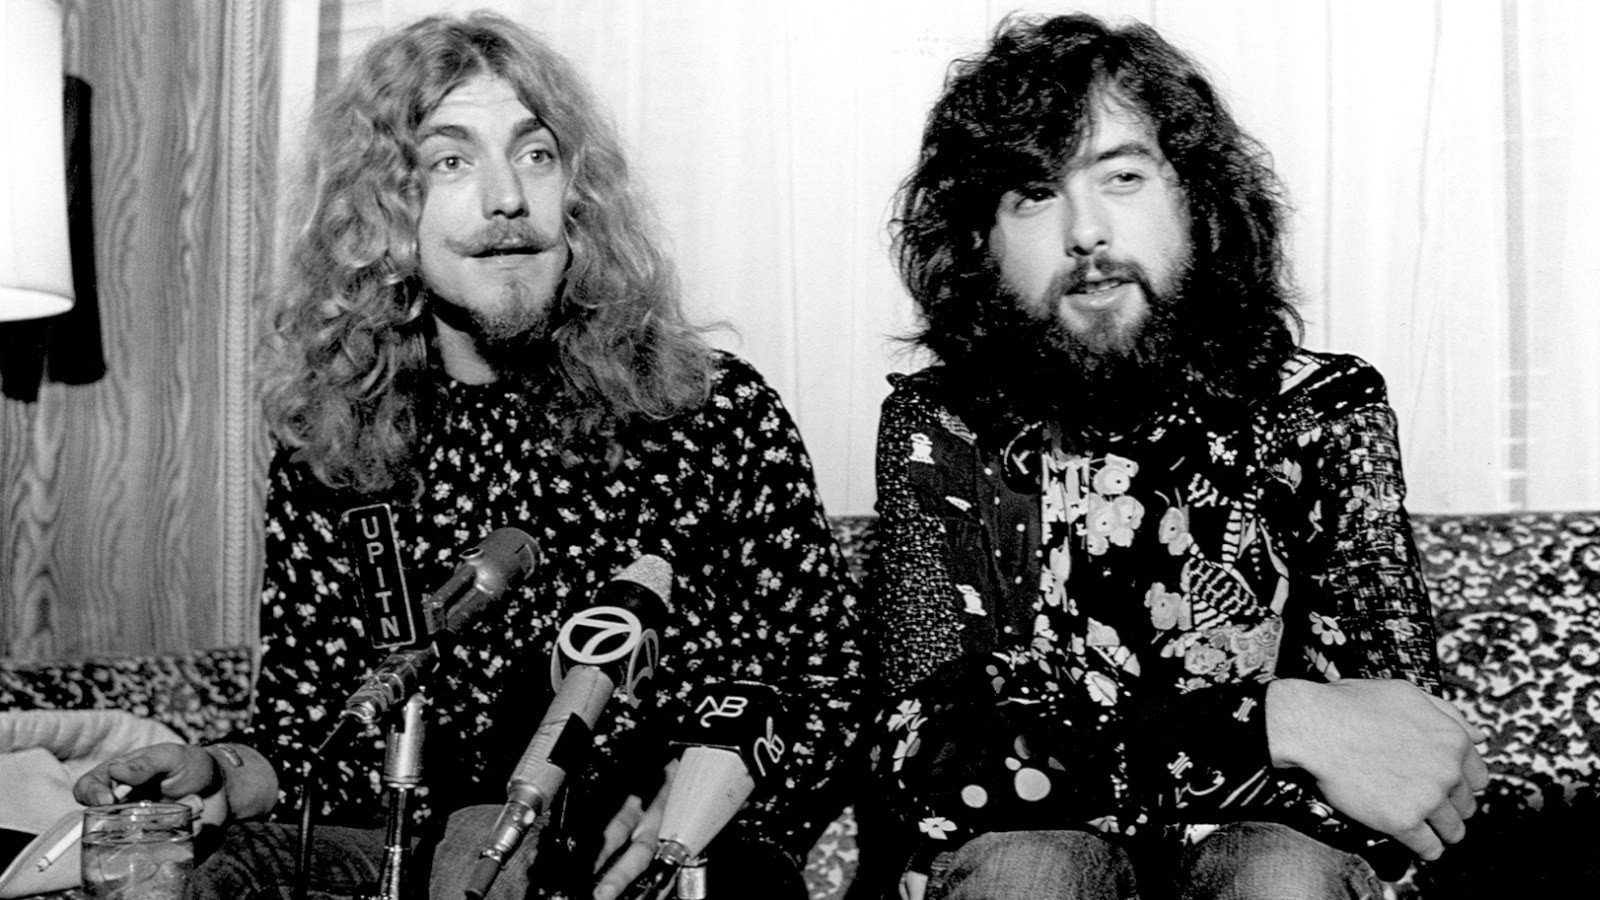 What Did Robert Plant and Jimmy Page Think About the Beatles